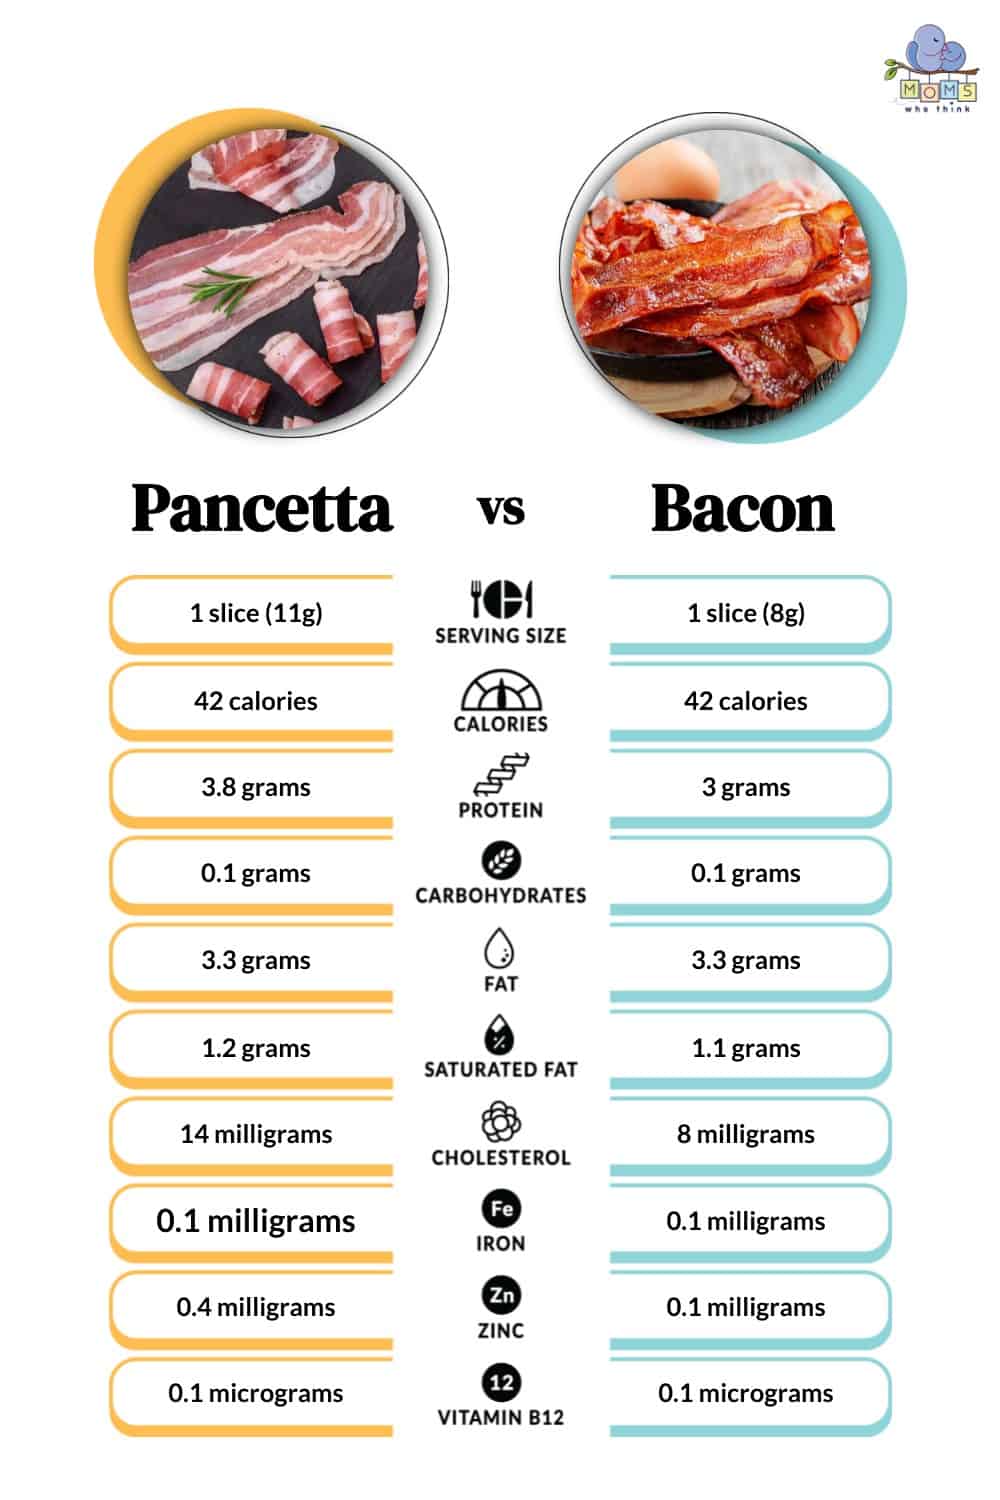 Pancetta vs Bacon Nutritional Facts